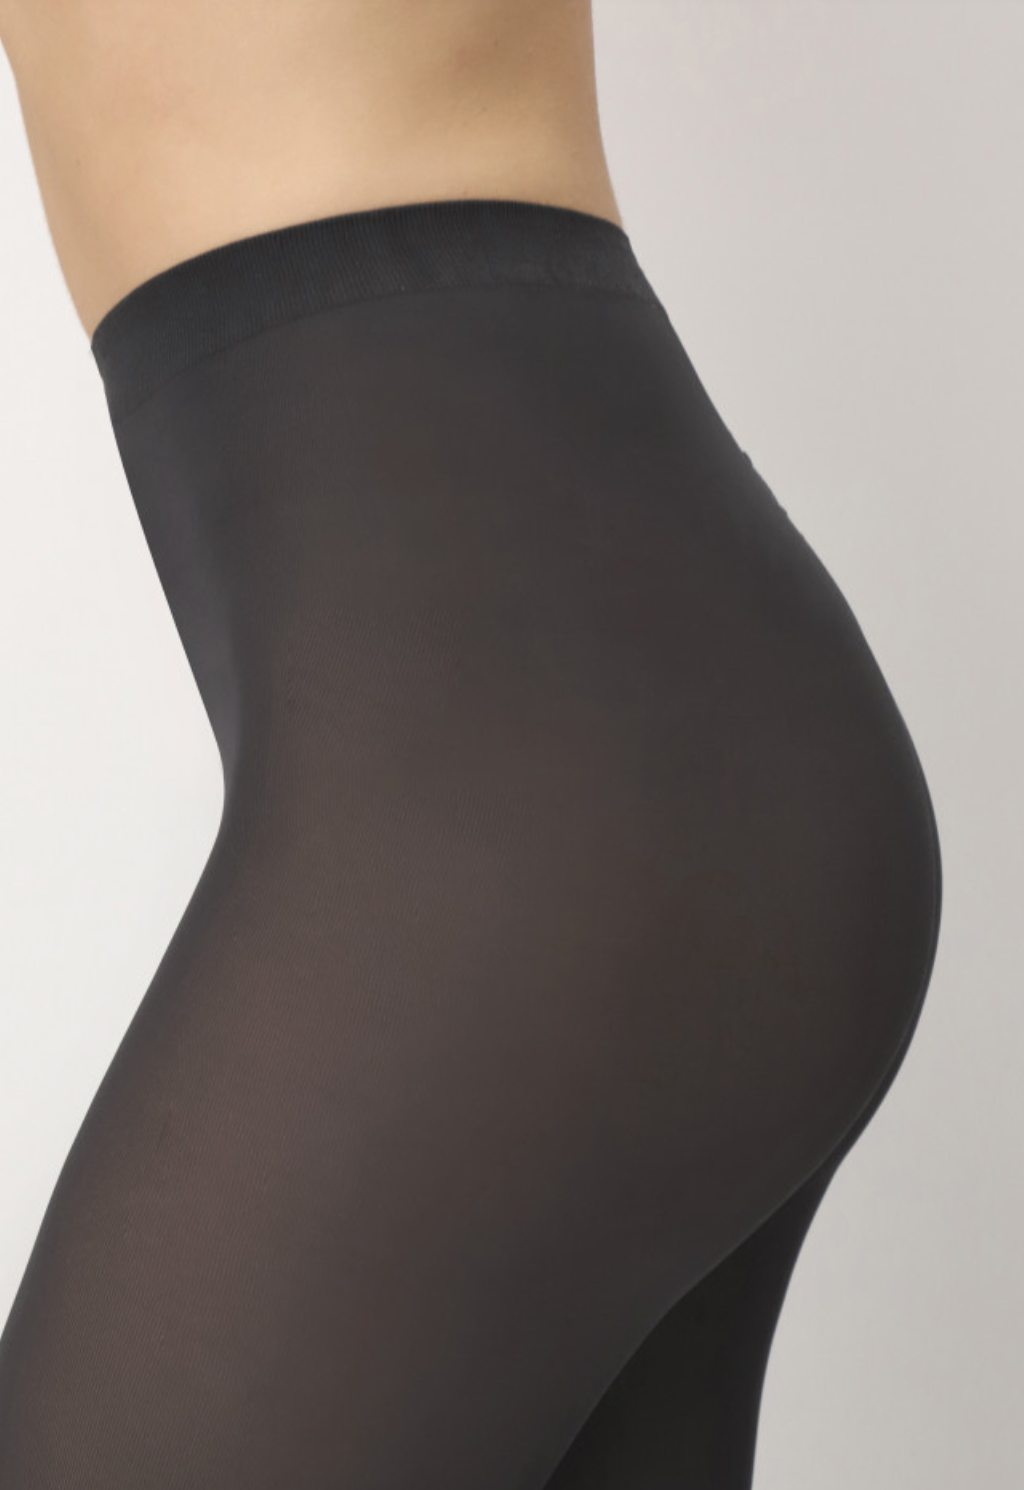 OroblÌ_ All Colors 50 Den - Dark grey microfibre opaque tights with cotton gusset, flat seams and deep comfort waistband.